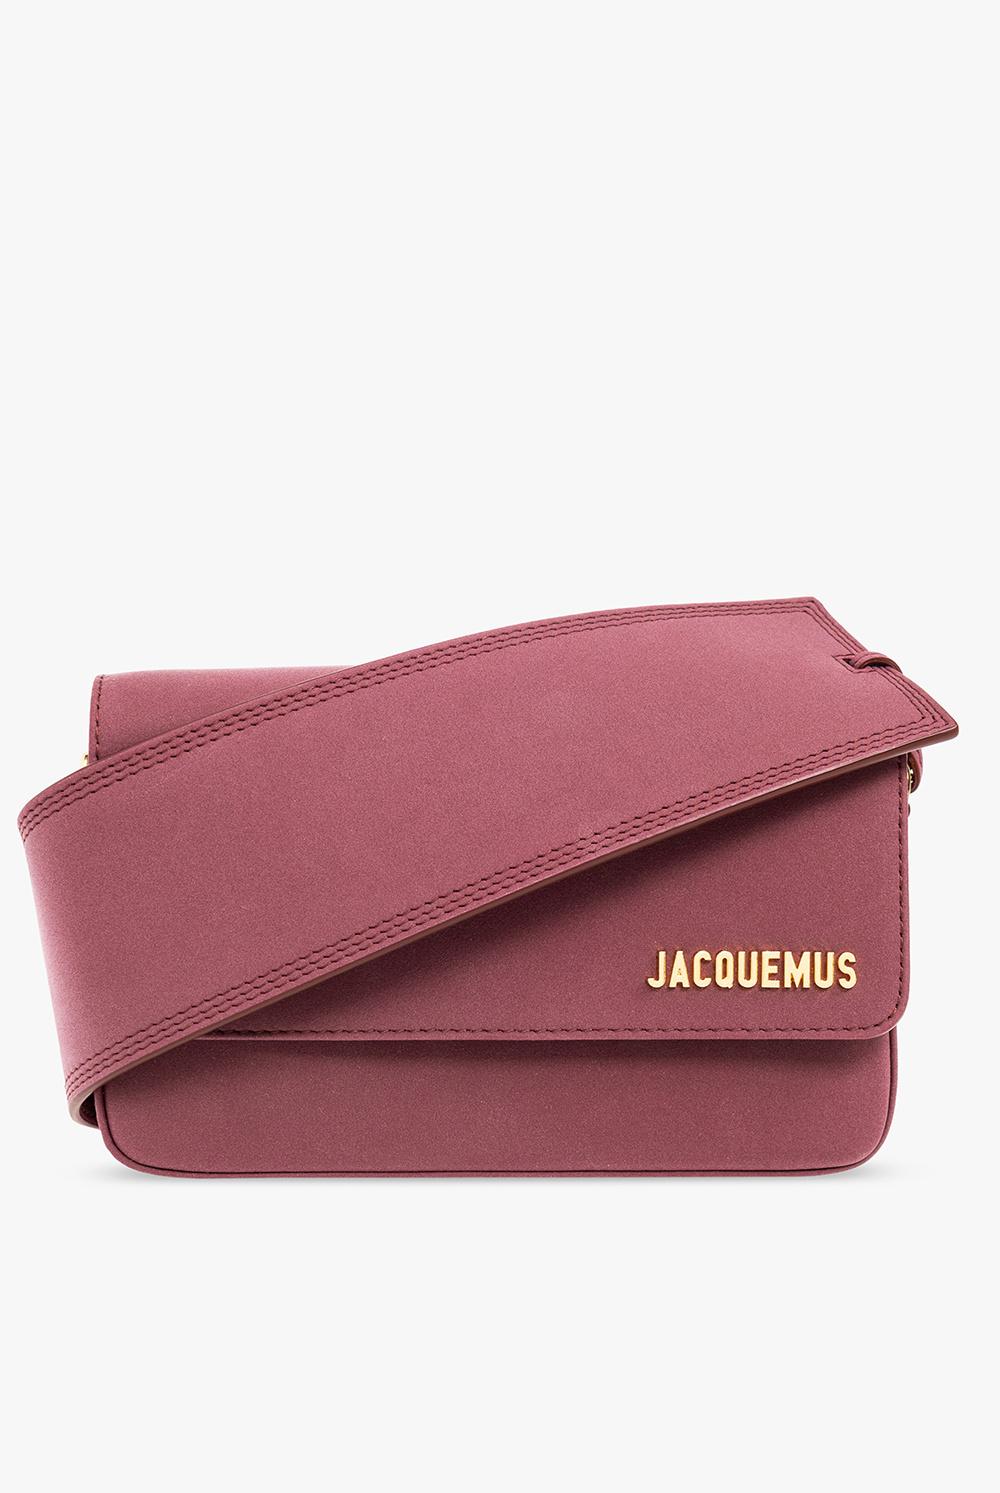 Jacquemus 'le Carinu' Shoulder Bag in Red | Lyst